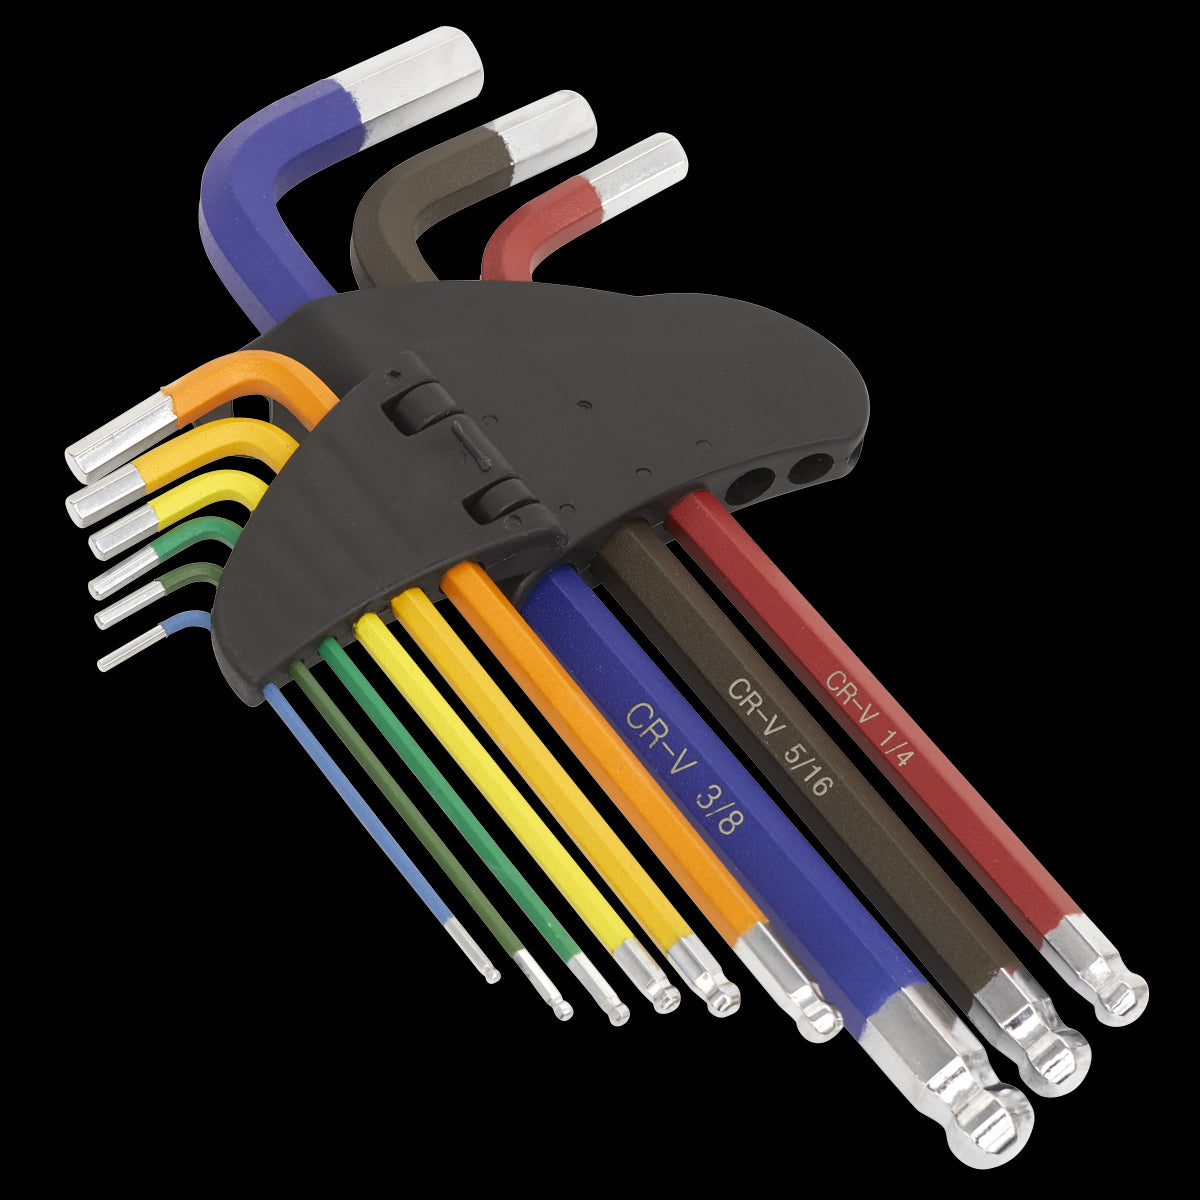 Sealey Ball-End Hex Key Set 9pc Long Colour-Coded Imperial AK7197